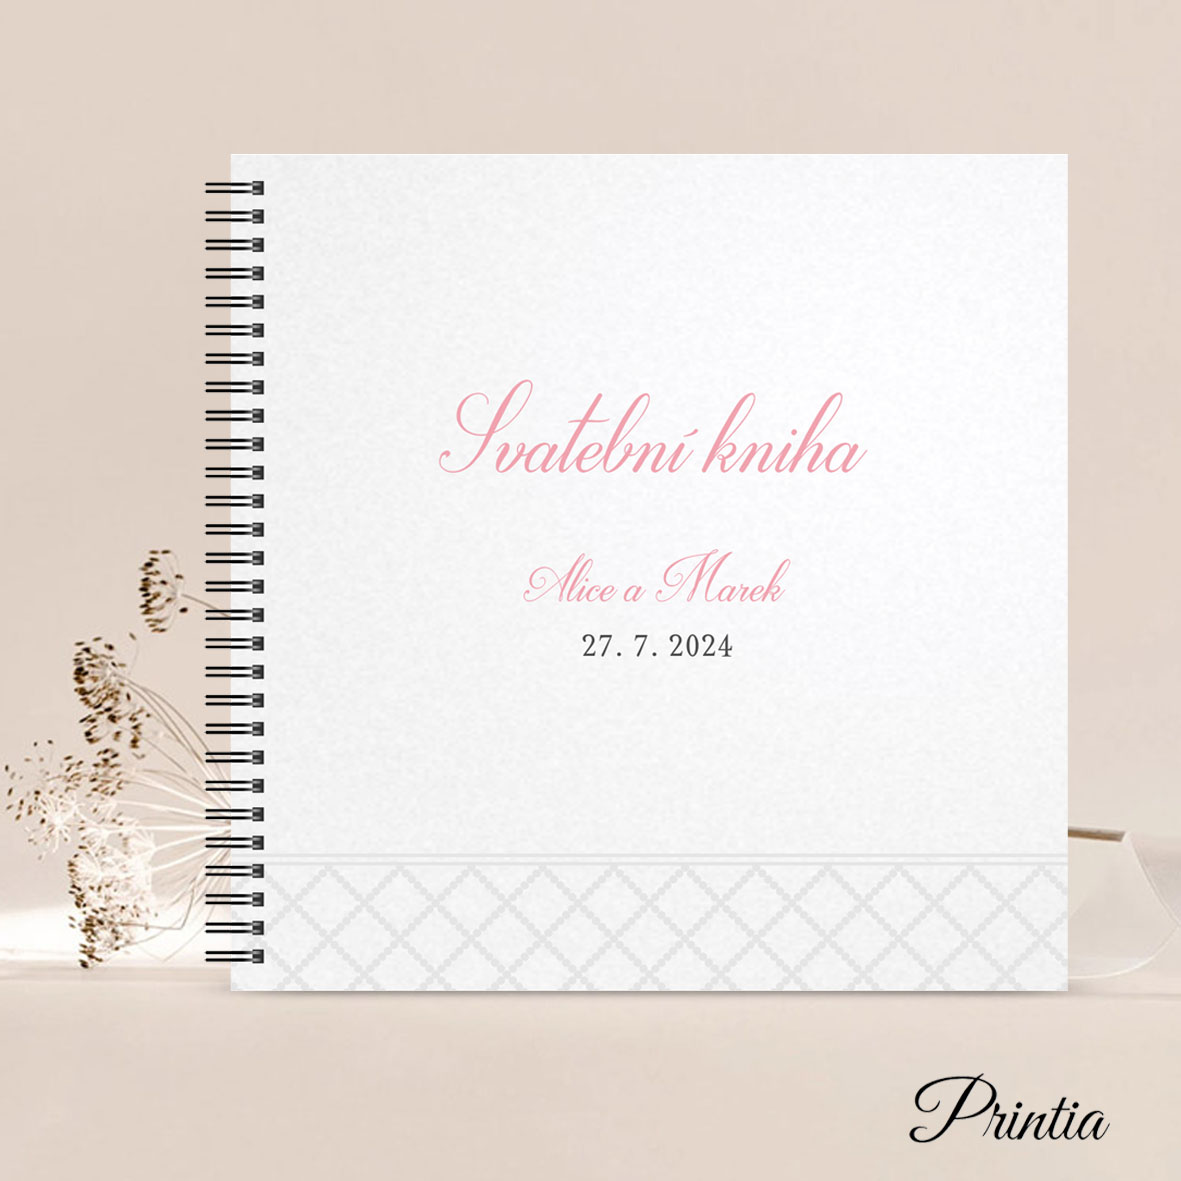 Wedding book with gray printed ornament